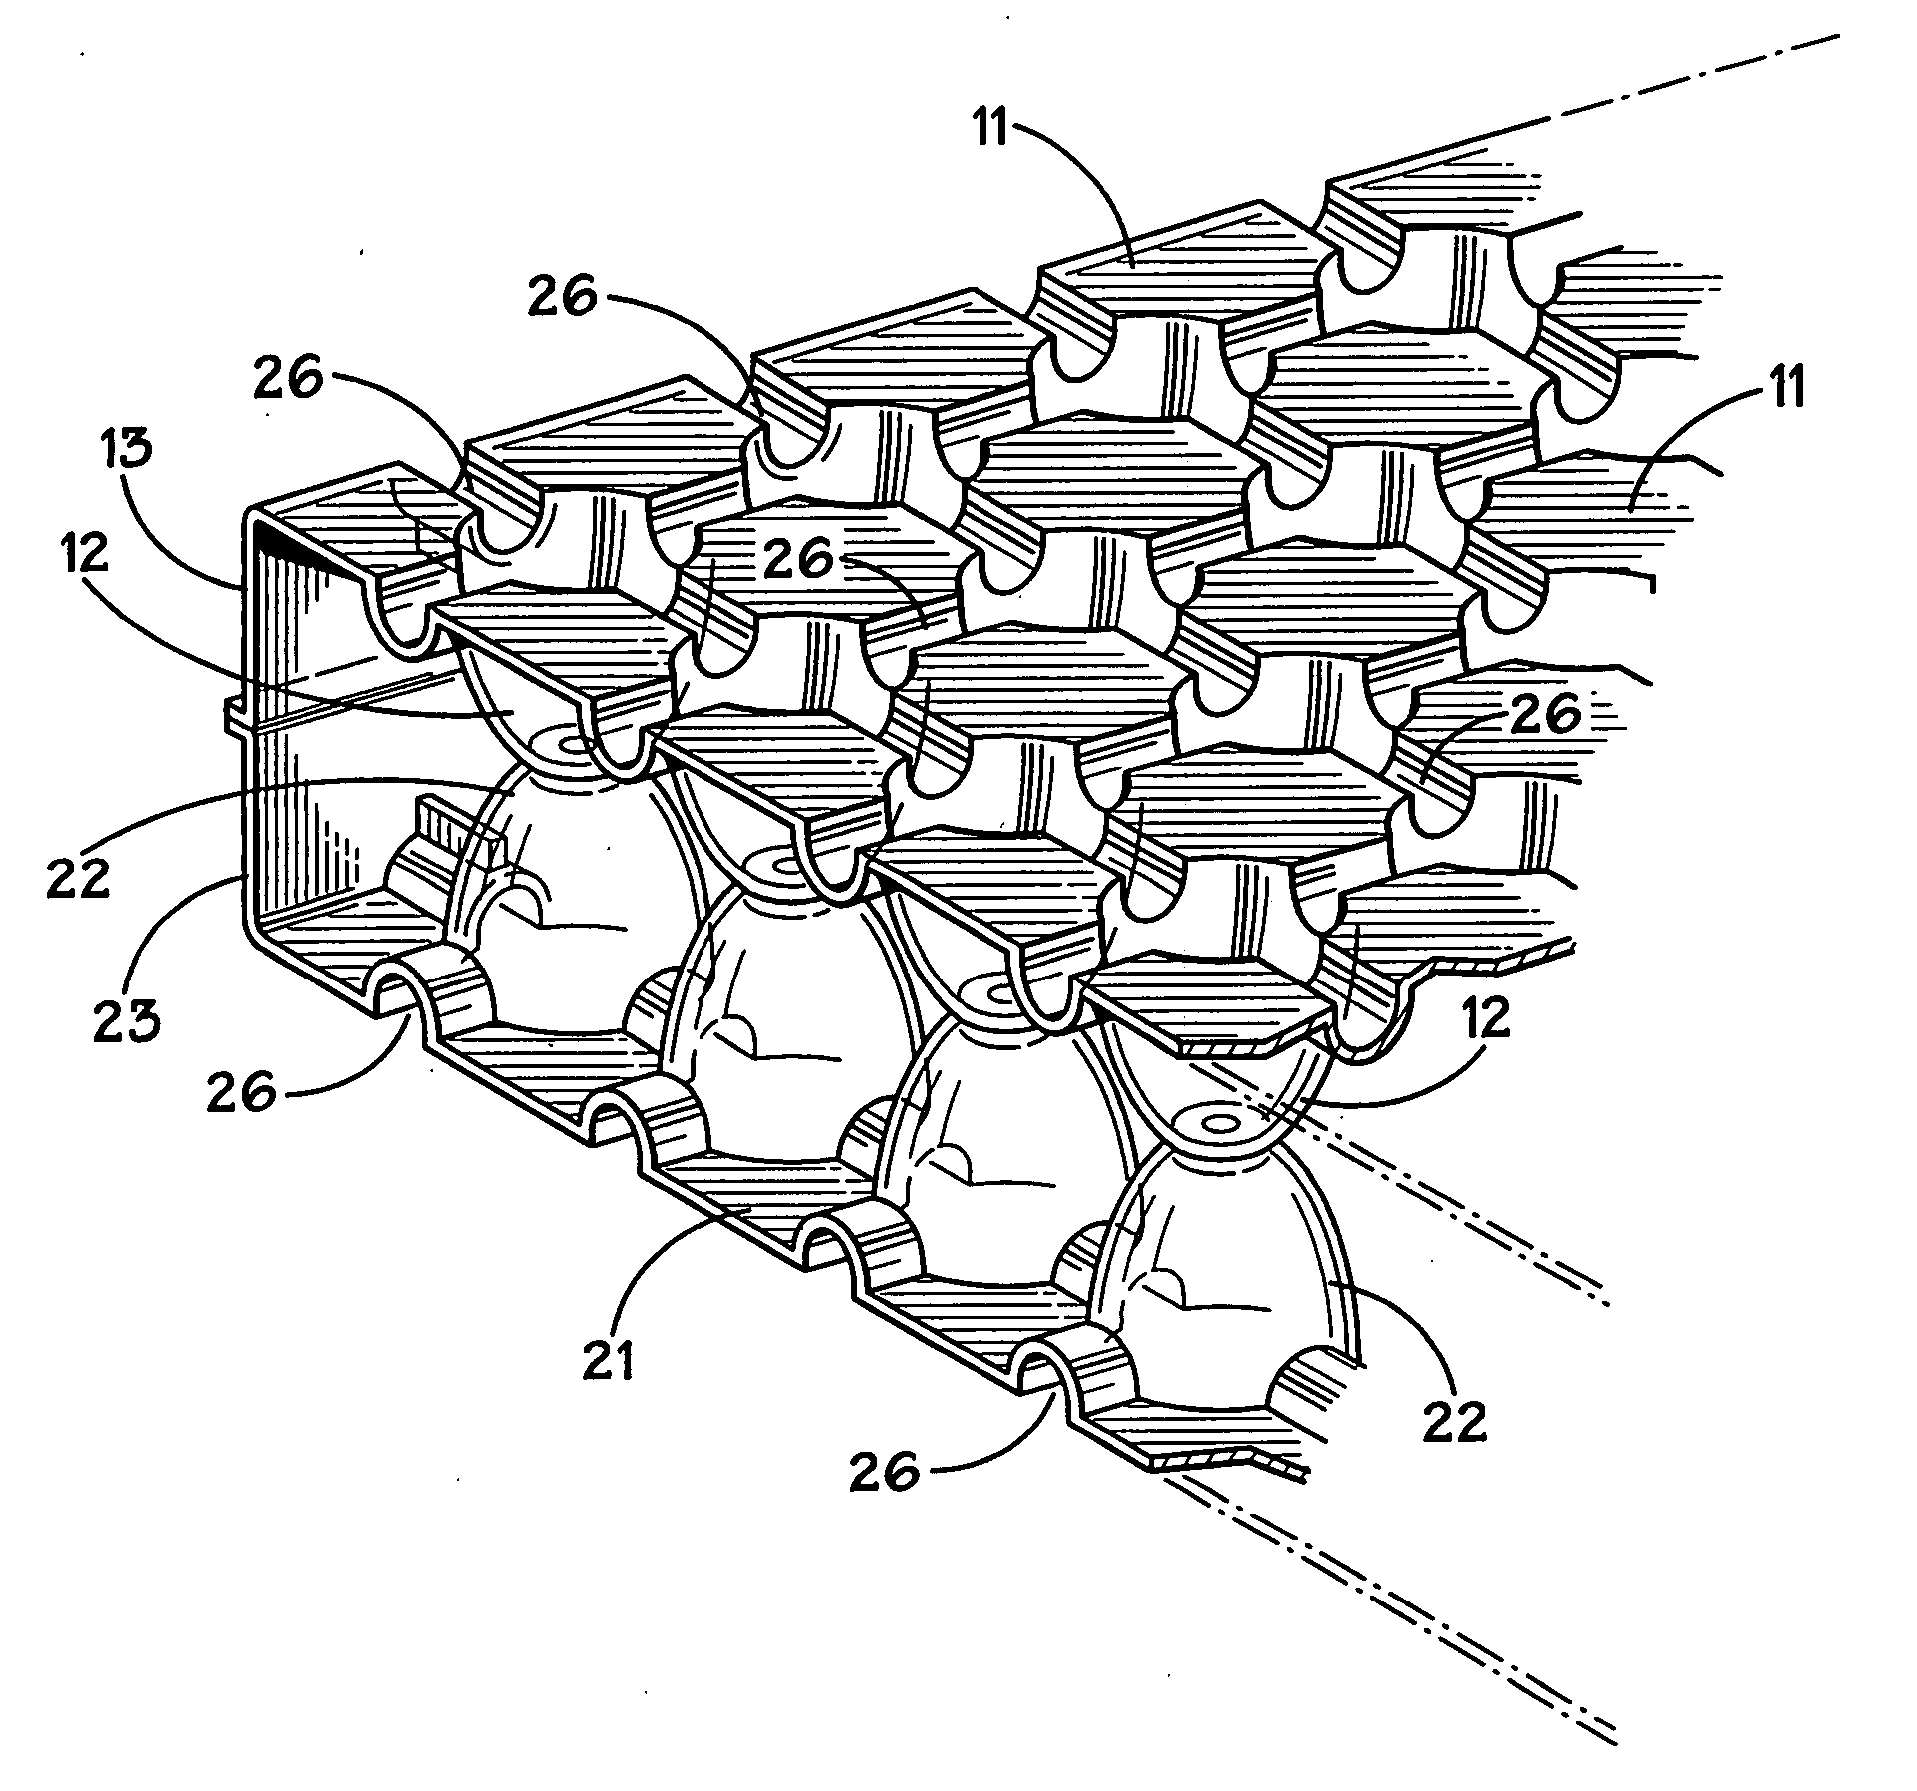 Cushioning structure for floor and ground surfaces